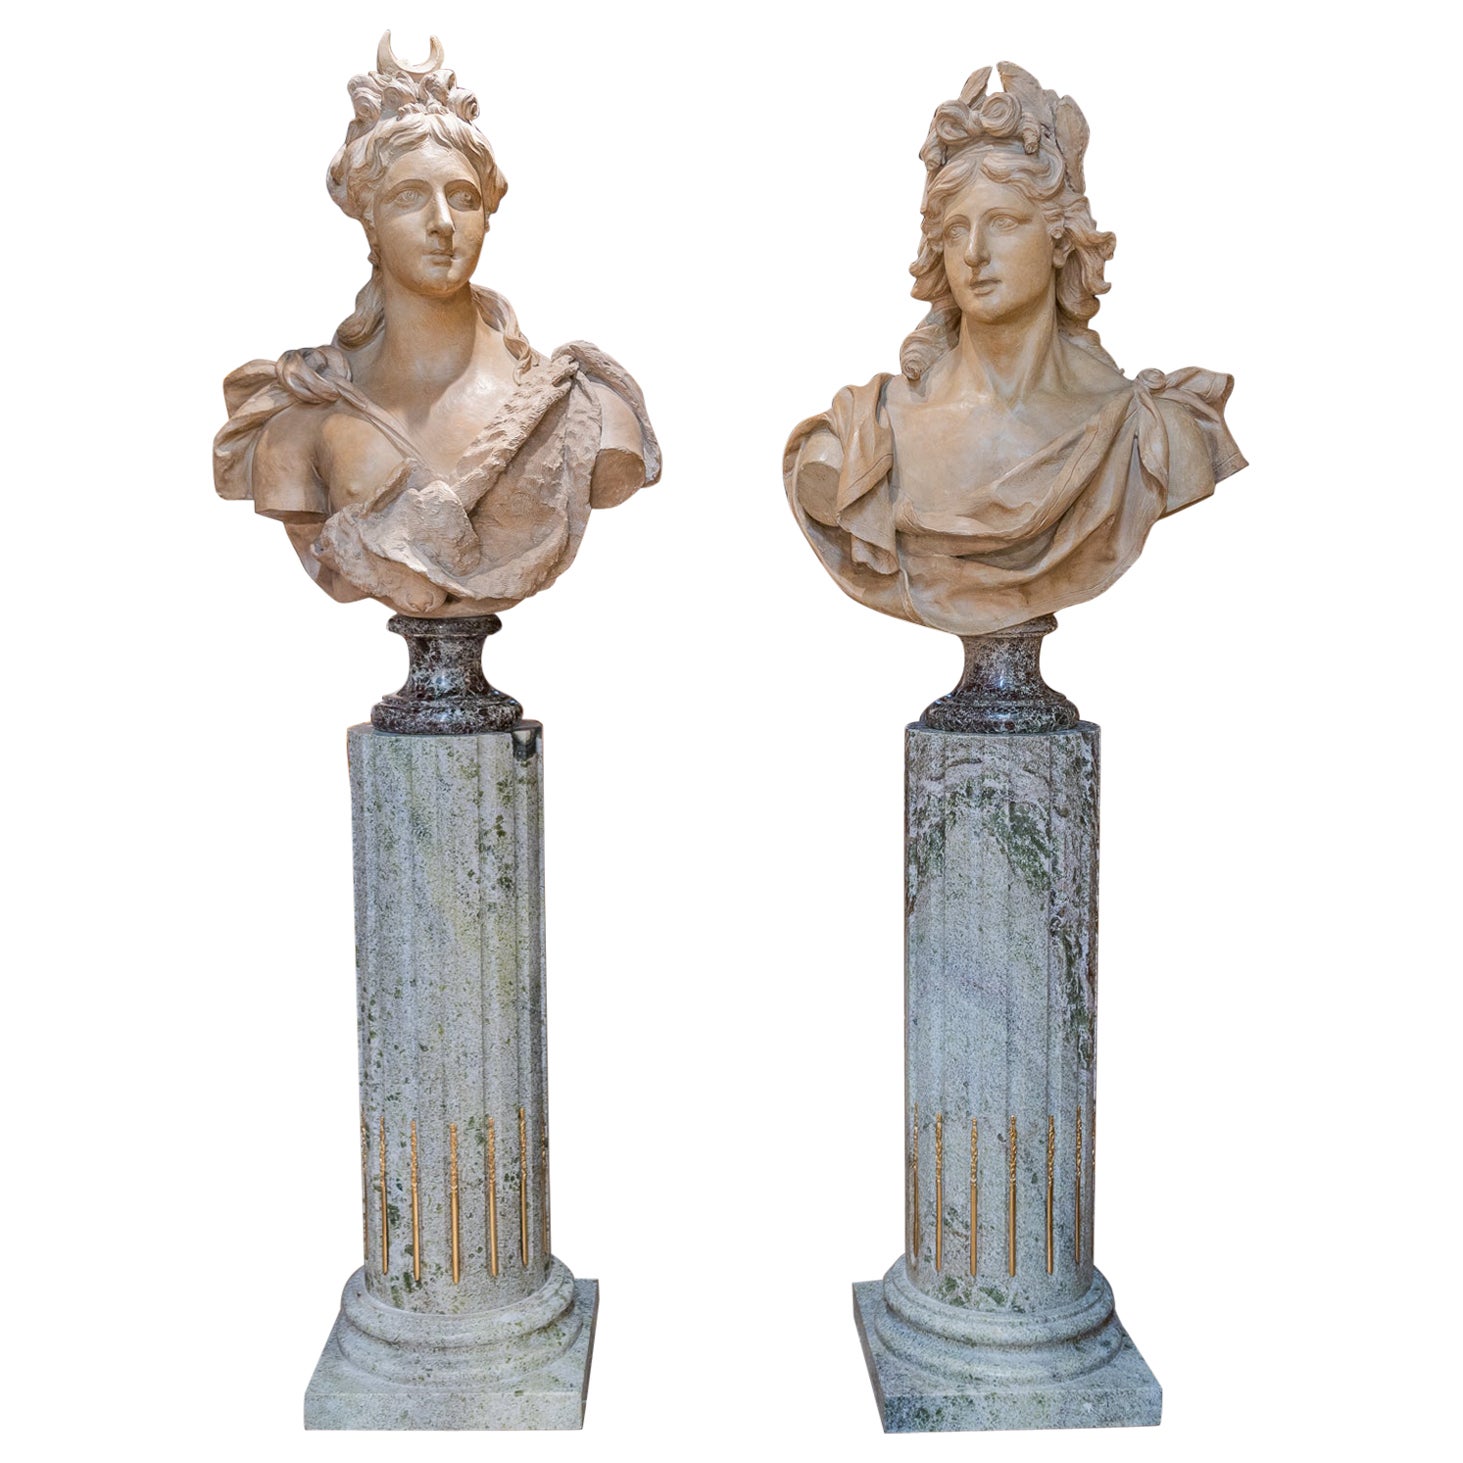 Magnificent Pair of Late 18th C Large Terra Cotta Busts of Apollo and Diana For Sale